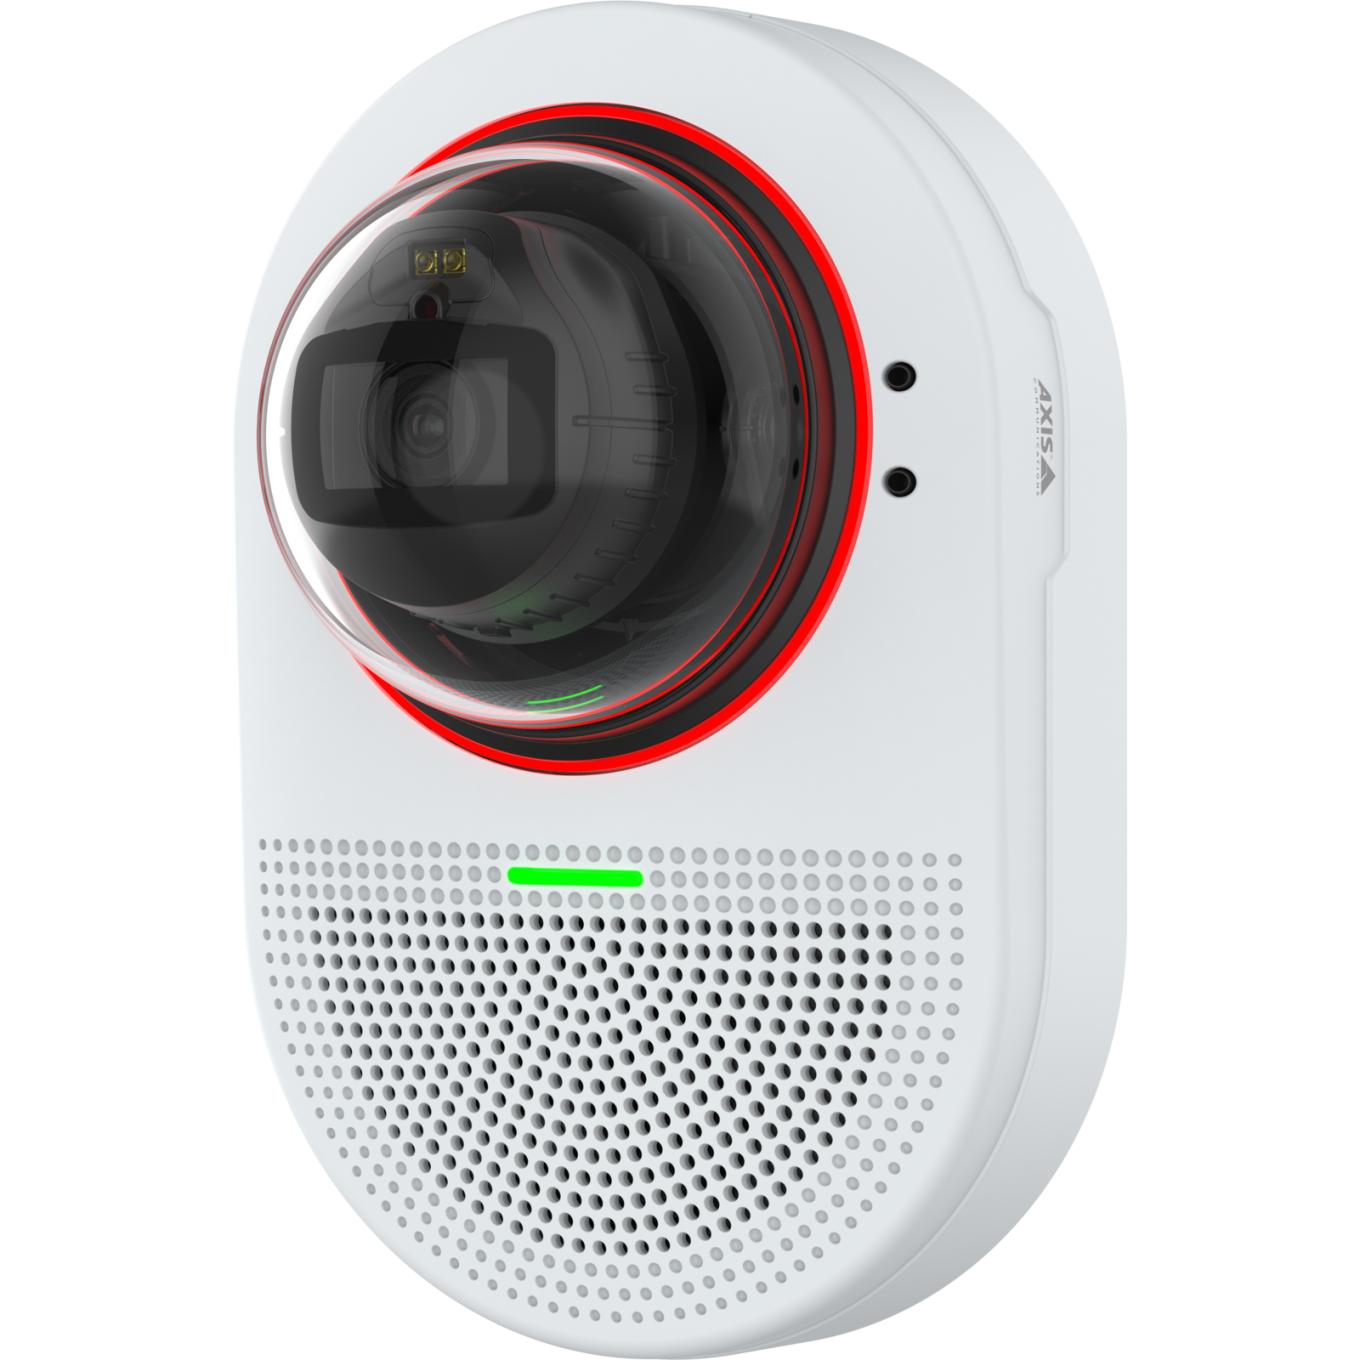 Axis AXIS Q9307-LV (02487-001) Dome Camera All-in-one audio-visual monitoring device